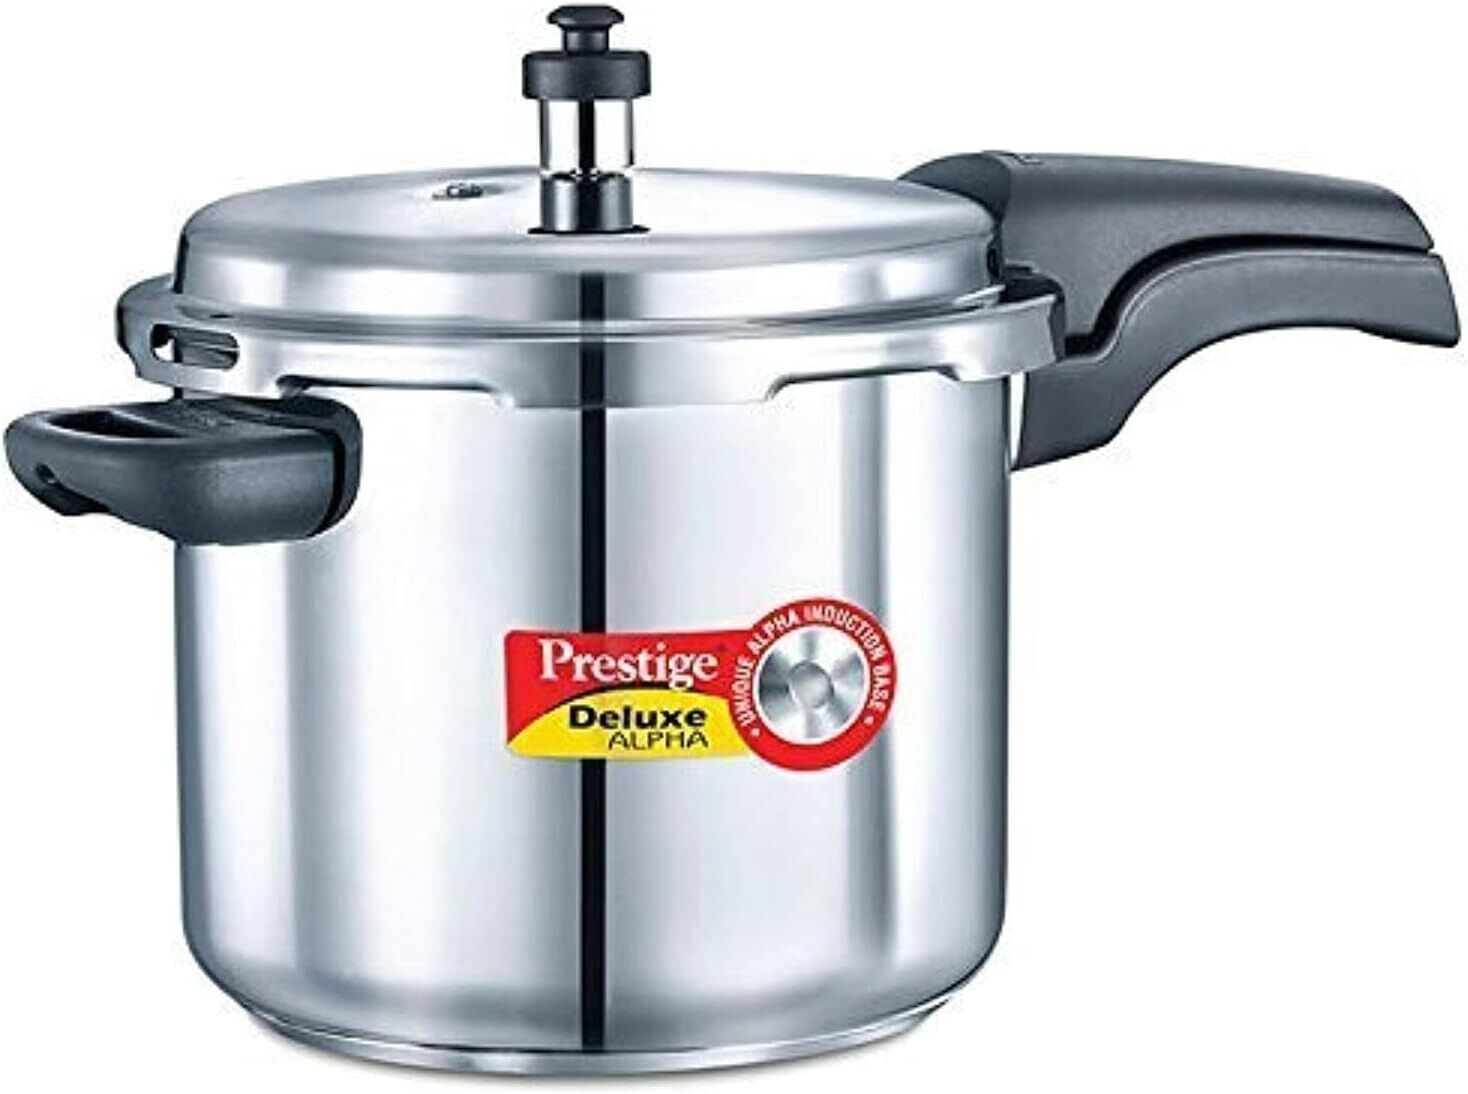 Prestige Deluxe Alpha Stainless Steel Pressure Cooker, 3.5 Litres, Silver